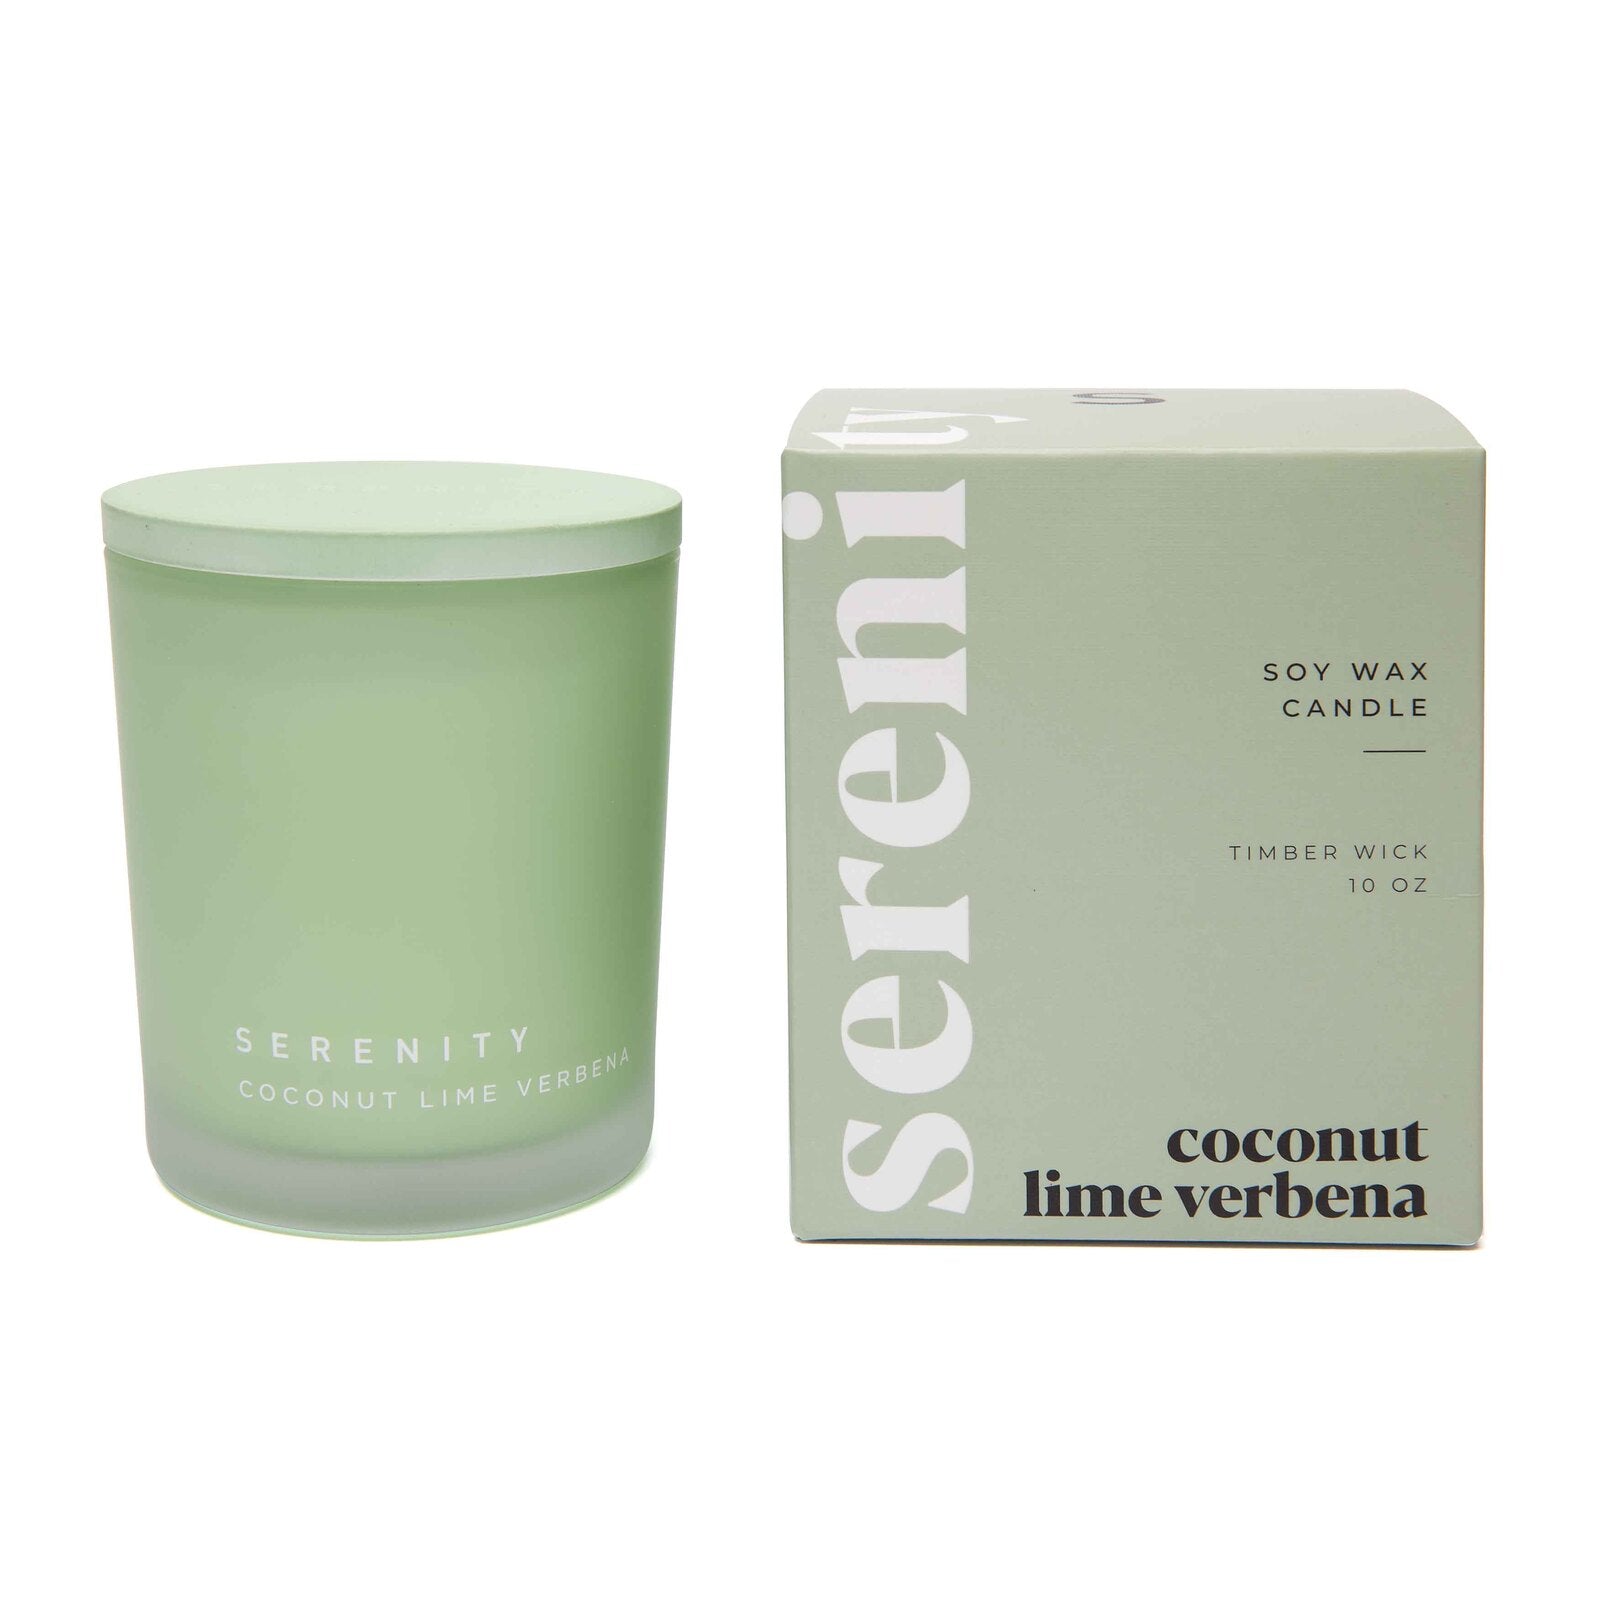 Coconut Lime Verbena Serenity Scented Jar Candle